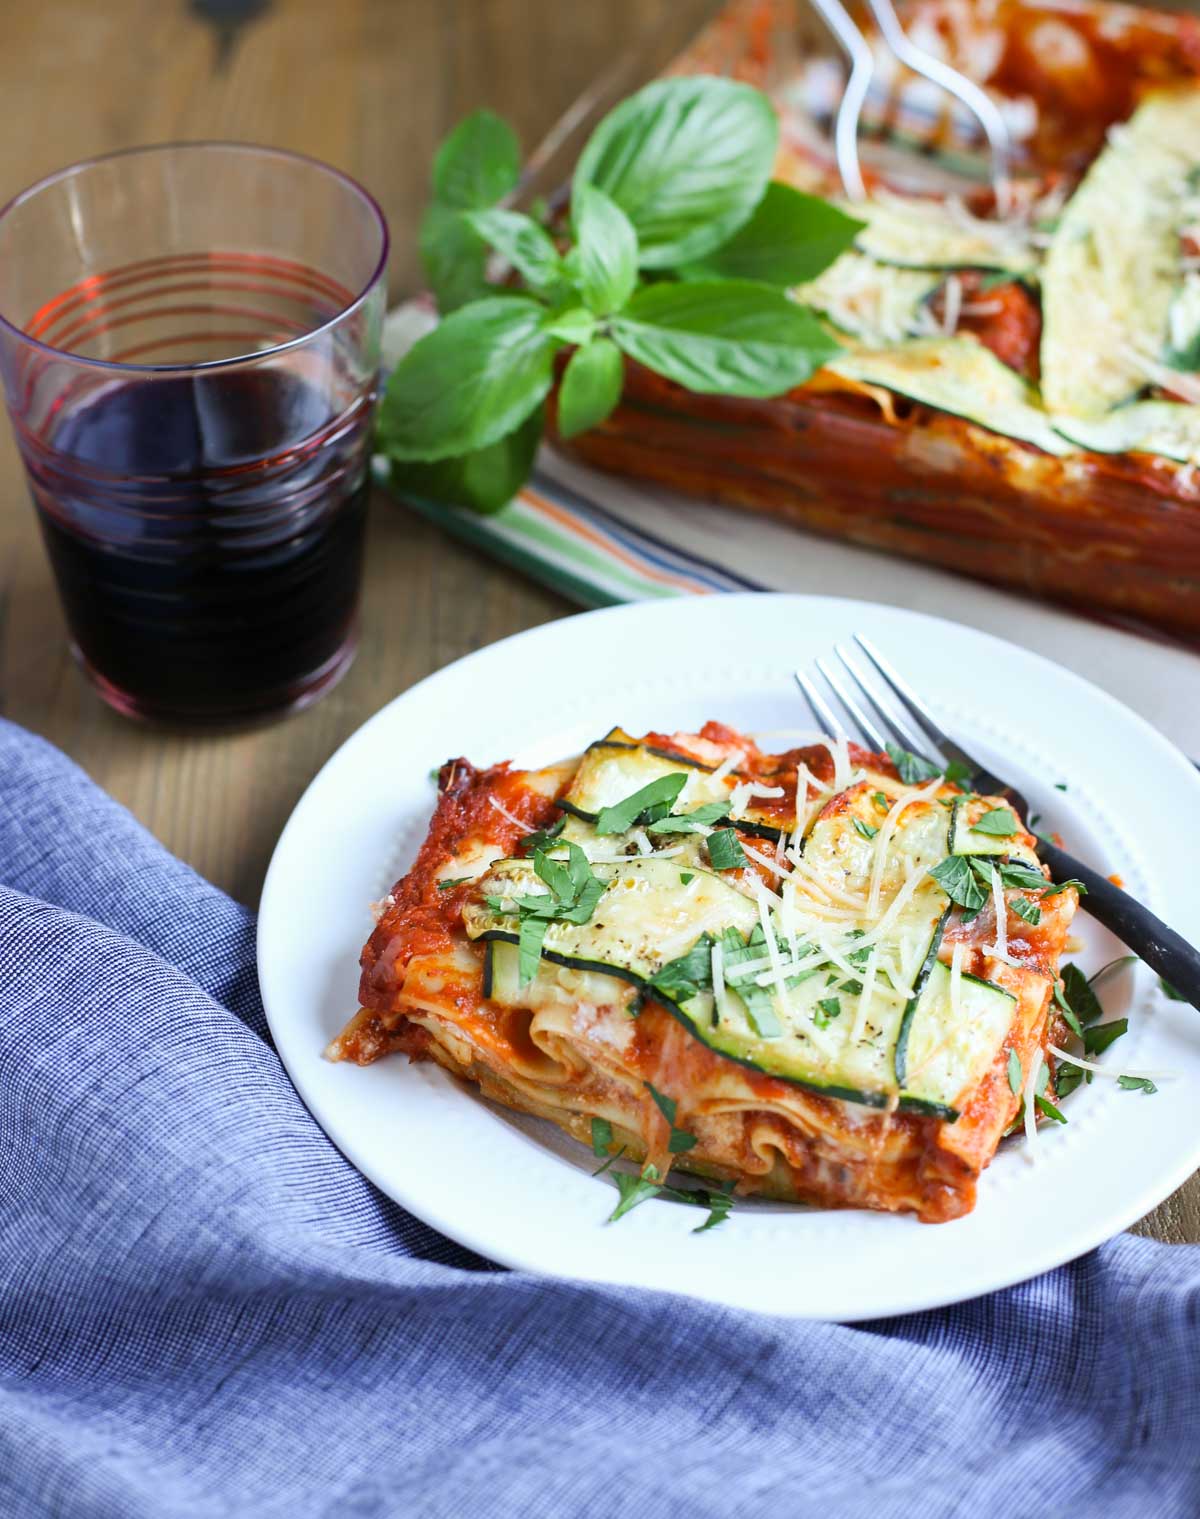 Zucchini Lasagna | Have you ever seen such a pretty lasagna? The Zucchini ribbons woven into a lattice pattern adds to the decadent taste of this dish! A crowd favorite for any event! WorldofPastabilities.com